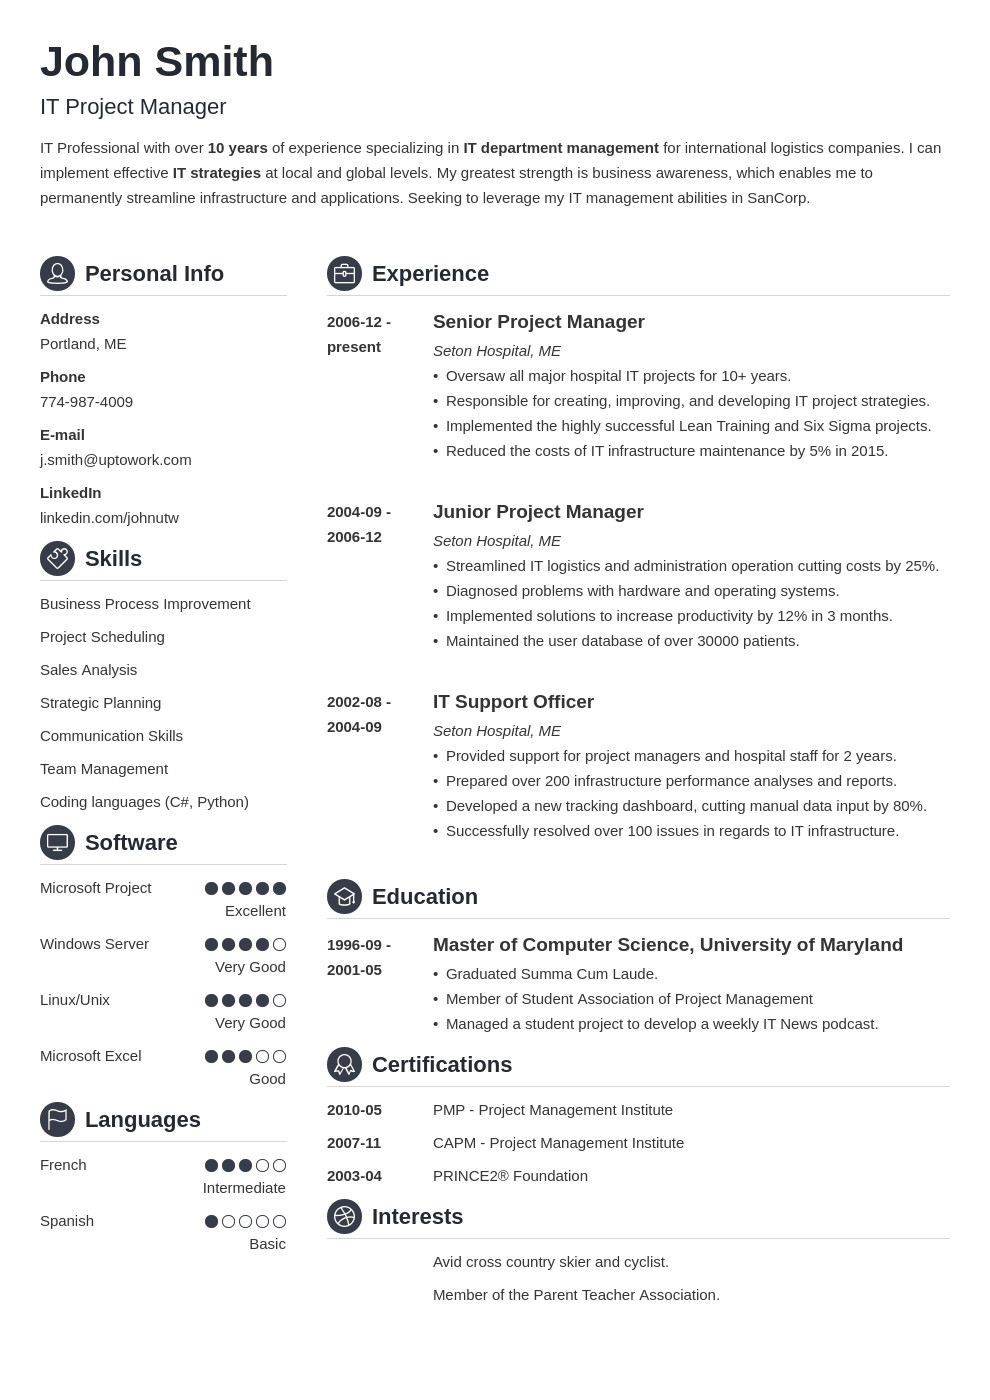 Free Template for Resume 20 Resume Templates [download] Create Your Resume In 5